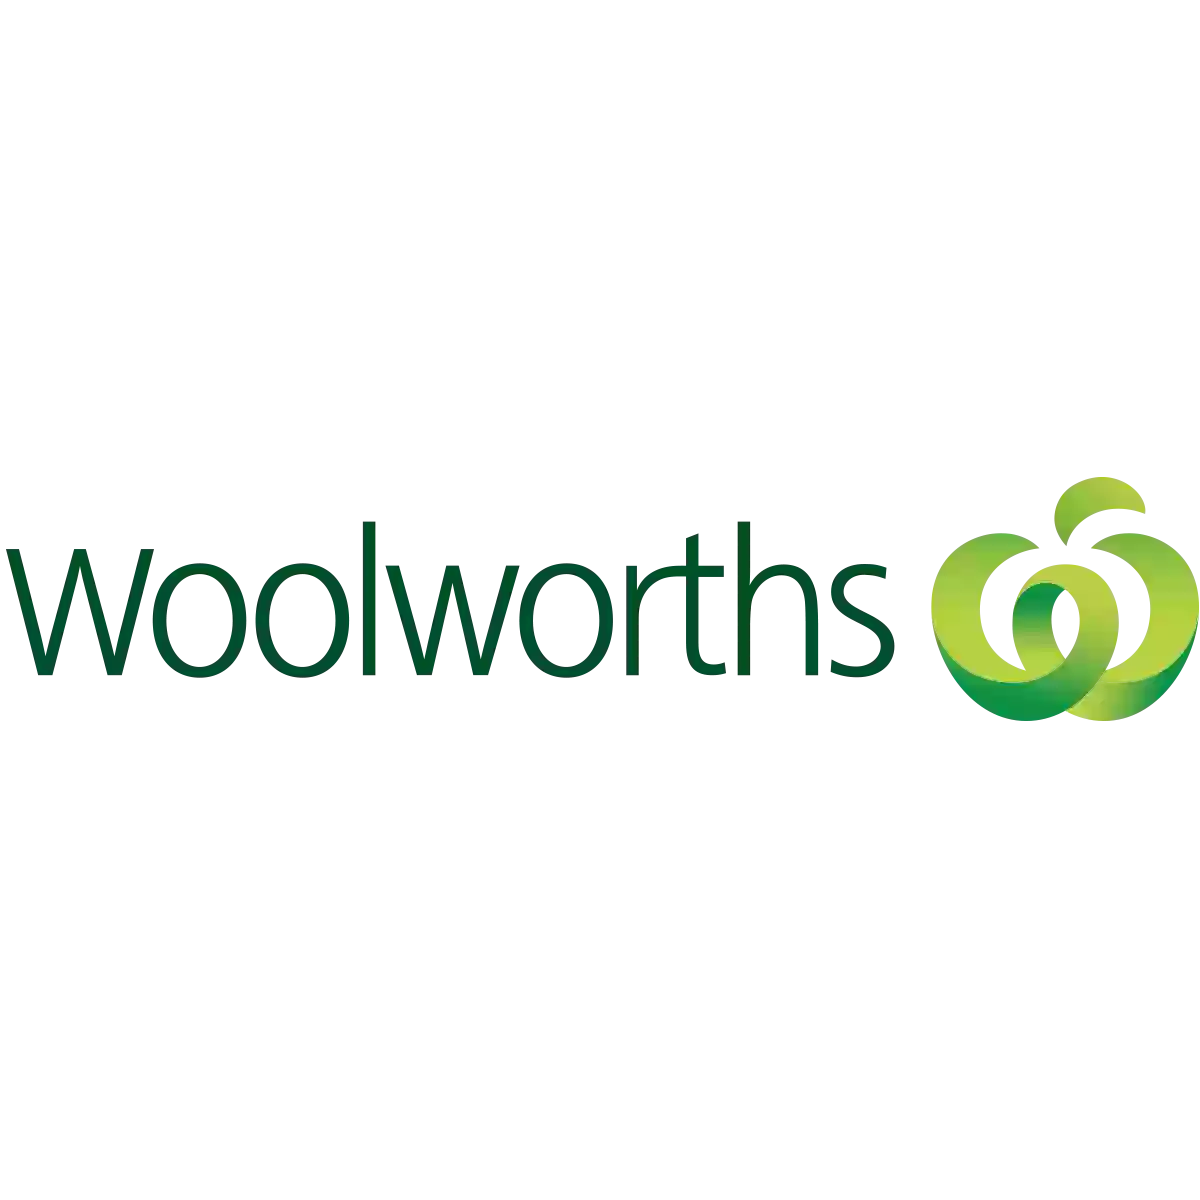 Woolworths Oakleigh